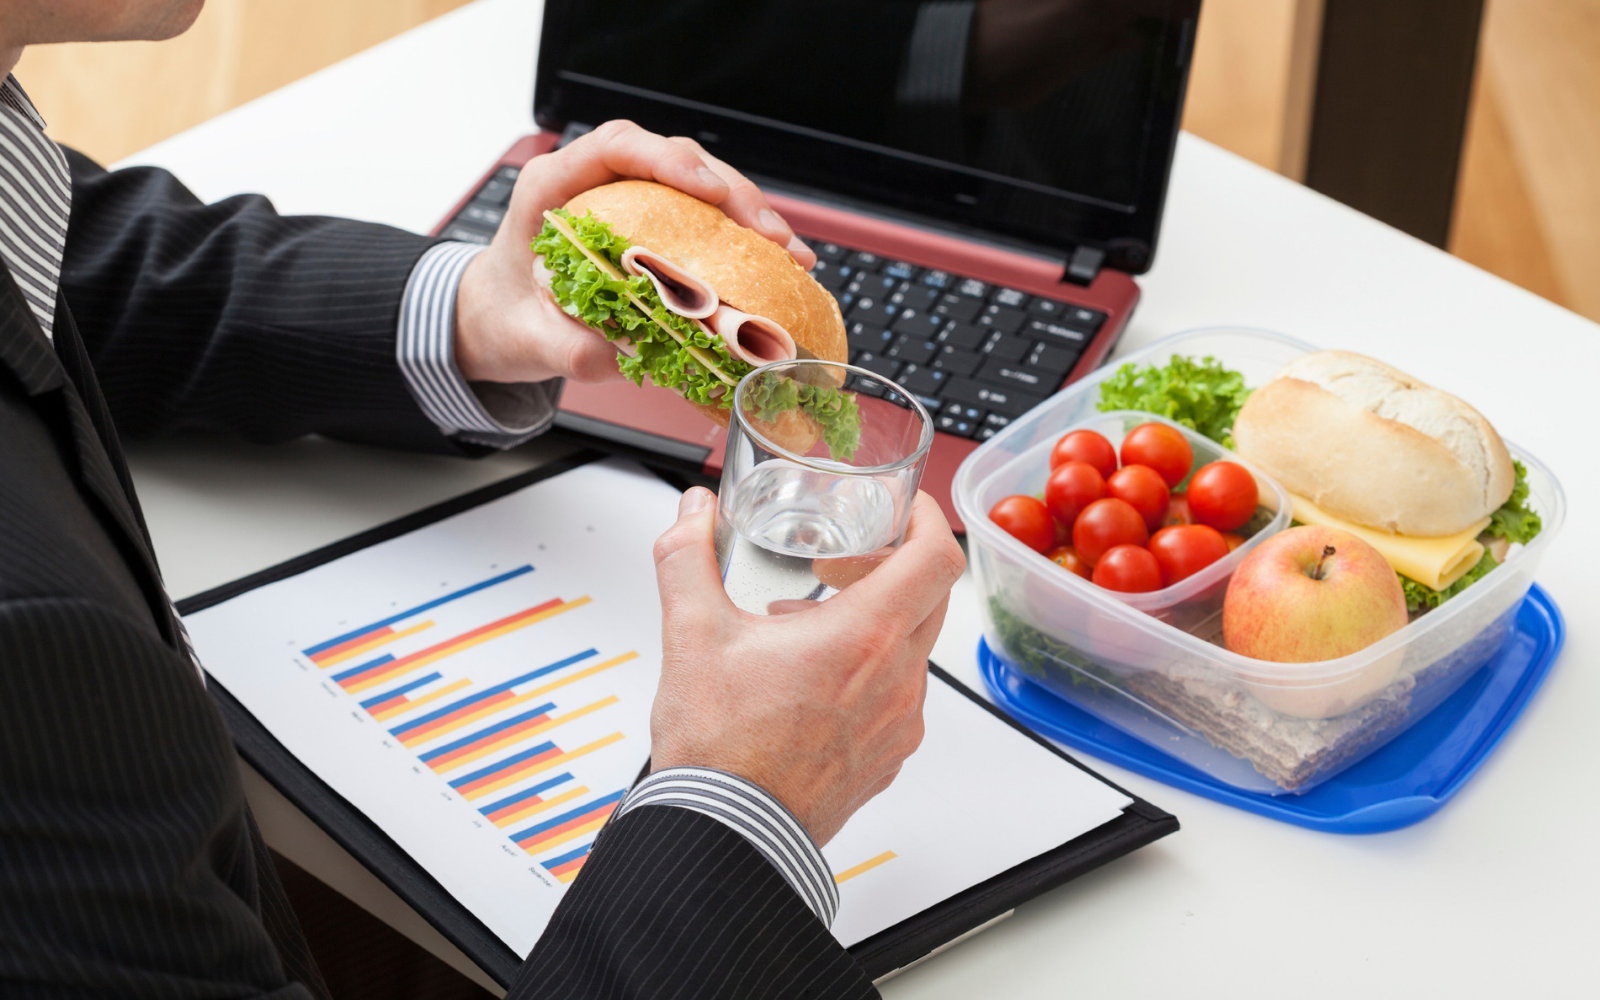 October's Nutrition News: Healthy Eating at Work